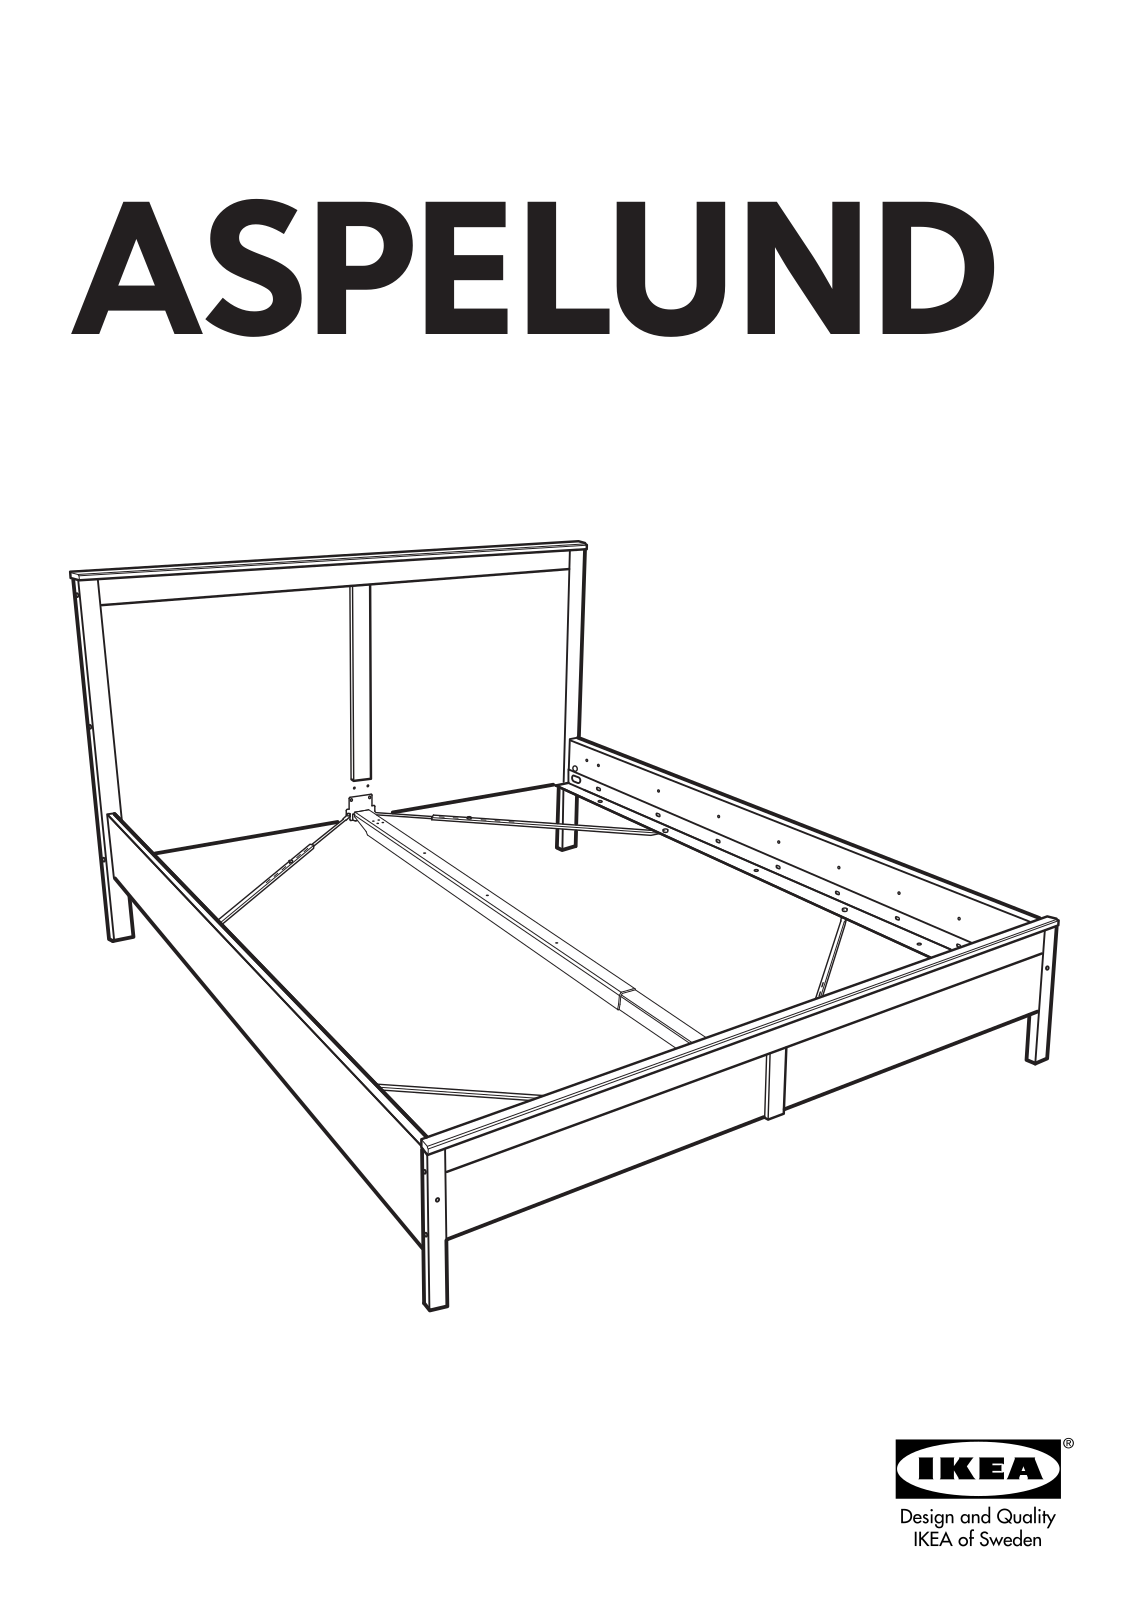 IKEA ASPELUND BED FRAME FULL-DOUBLE Assembly Instruction